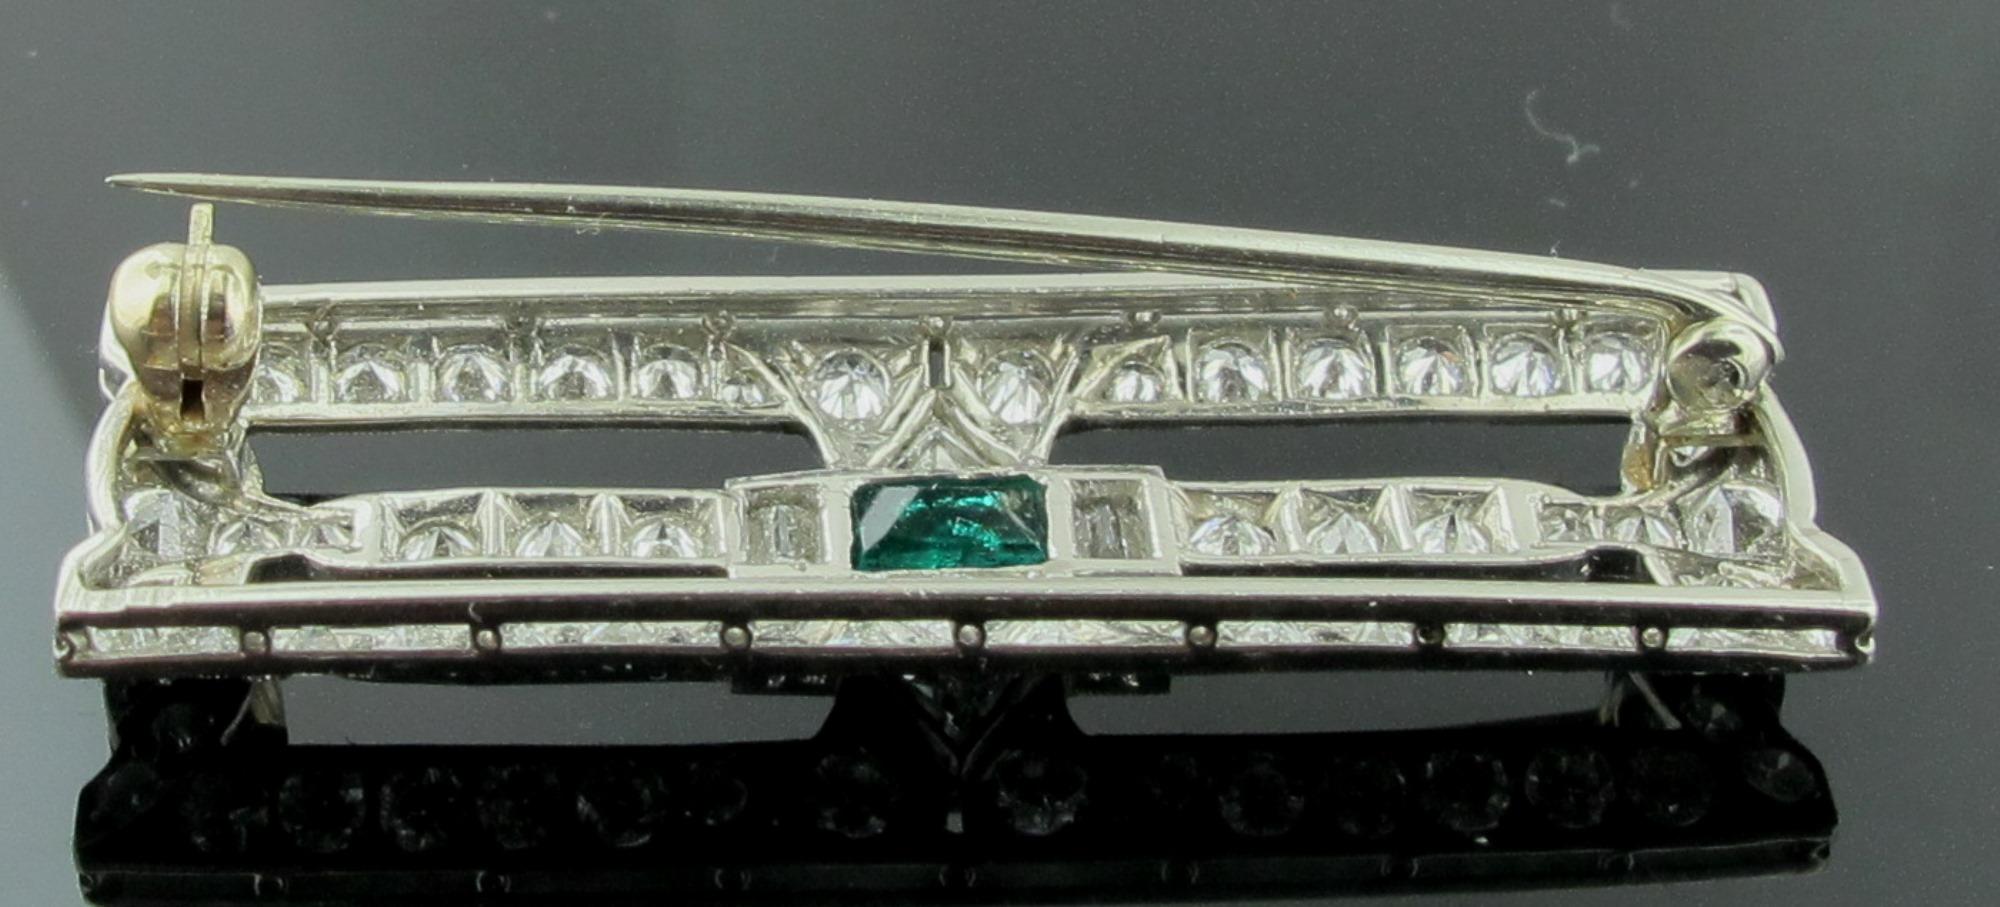 This square brooch is set in Platinum and has 49 round brilliant cut diamonds, 2 Trilliant cuts and 2 Baguette cuts for a total diamond weight of 4.25 carats.  In the center is an emerald cut Emerald.  This Brooch is Art Deco Circa 1920.